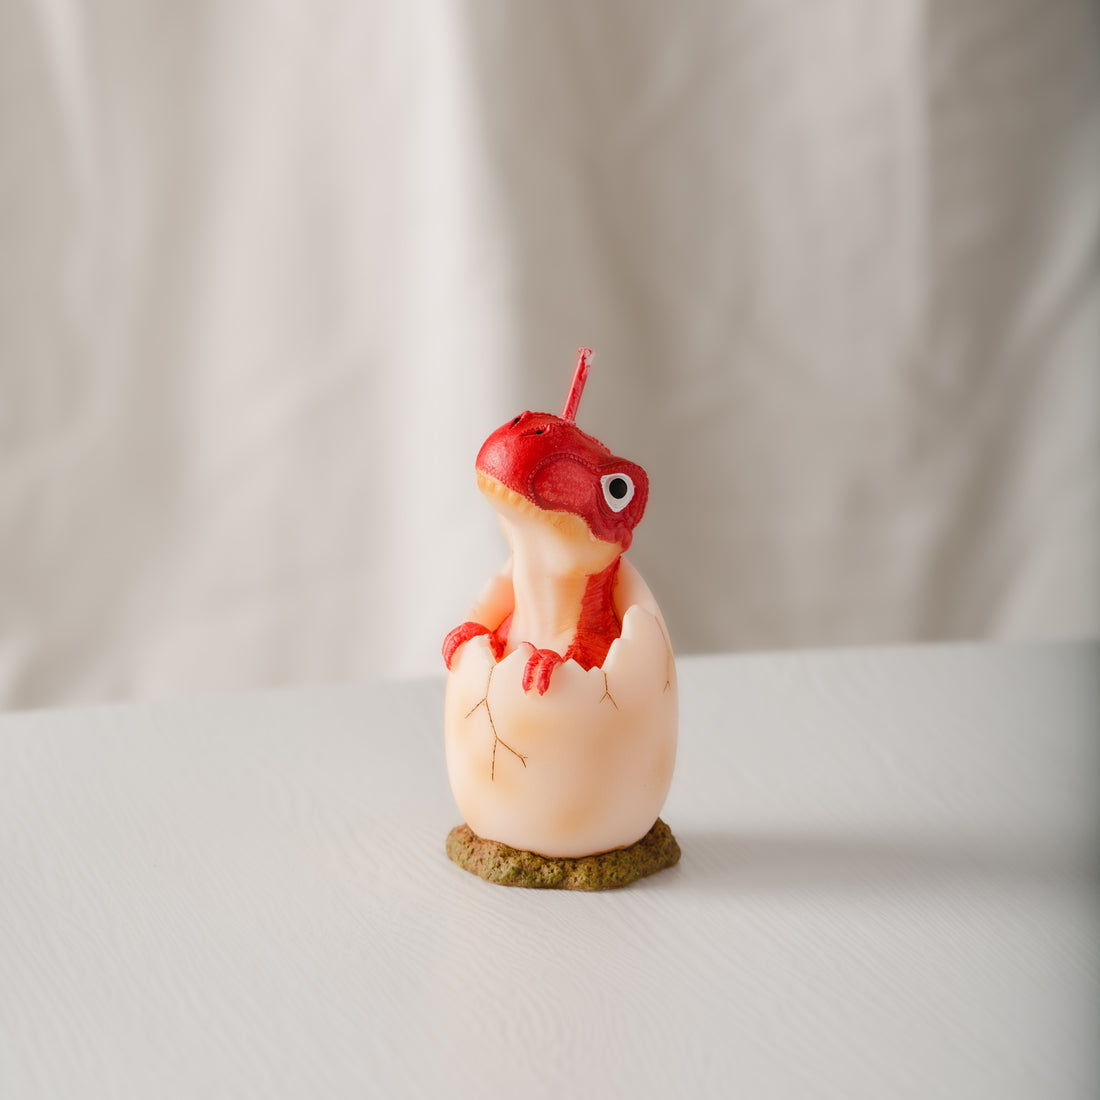 Discover the power of fragrance with this Red Baby Dinosaur Candle.